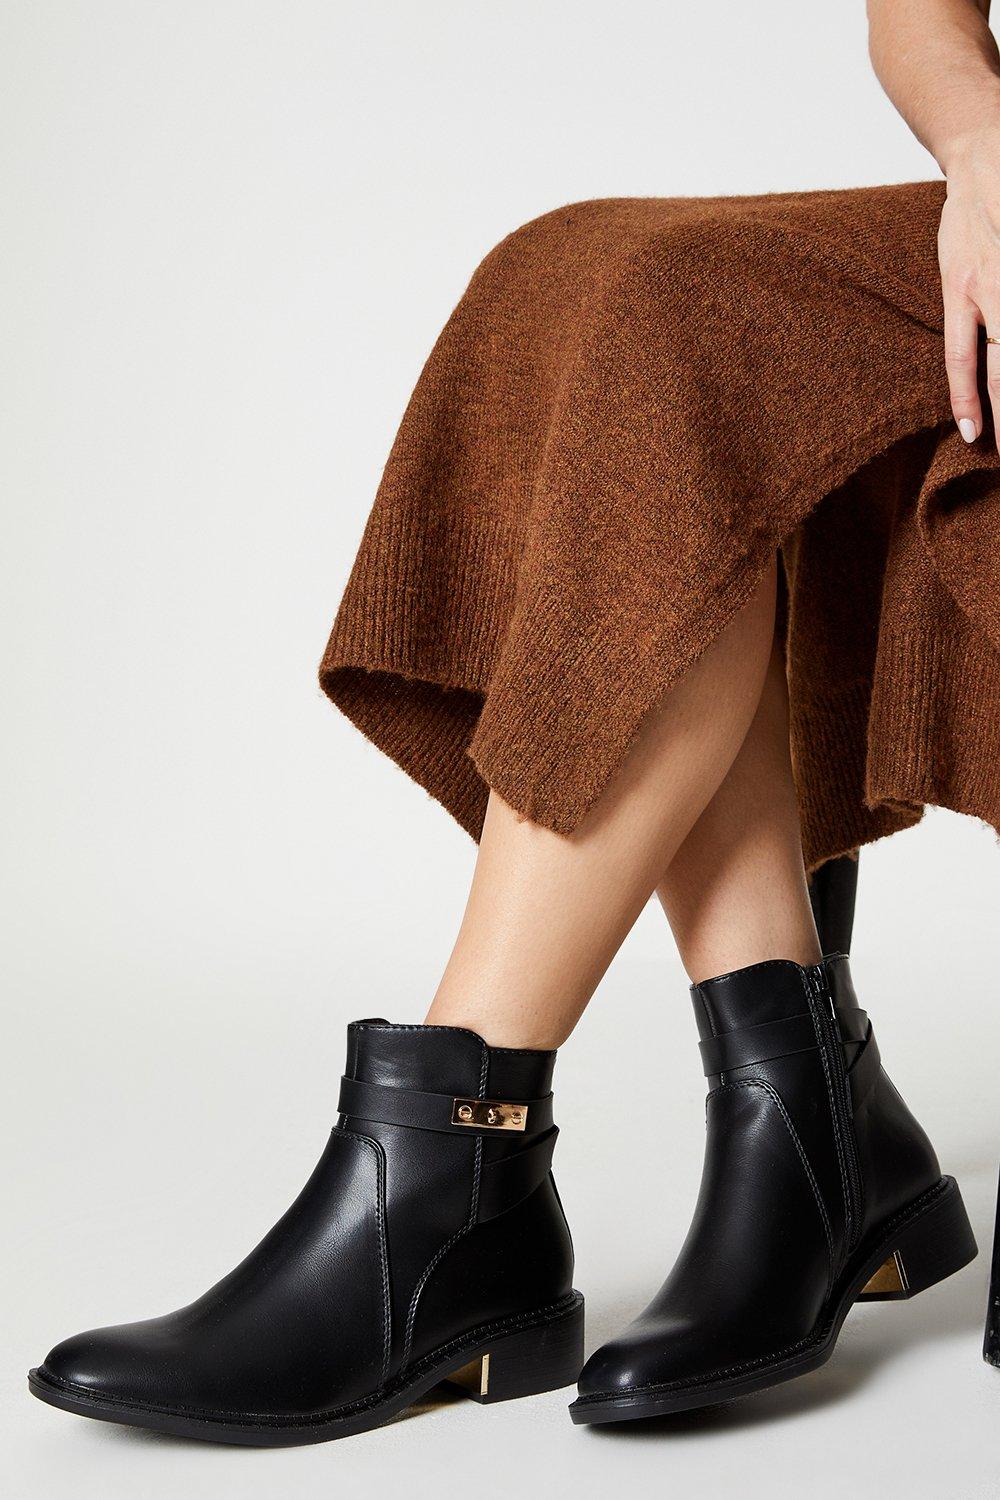 Metal Trim Detail Low Heel Riding Ankle Boots